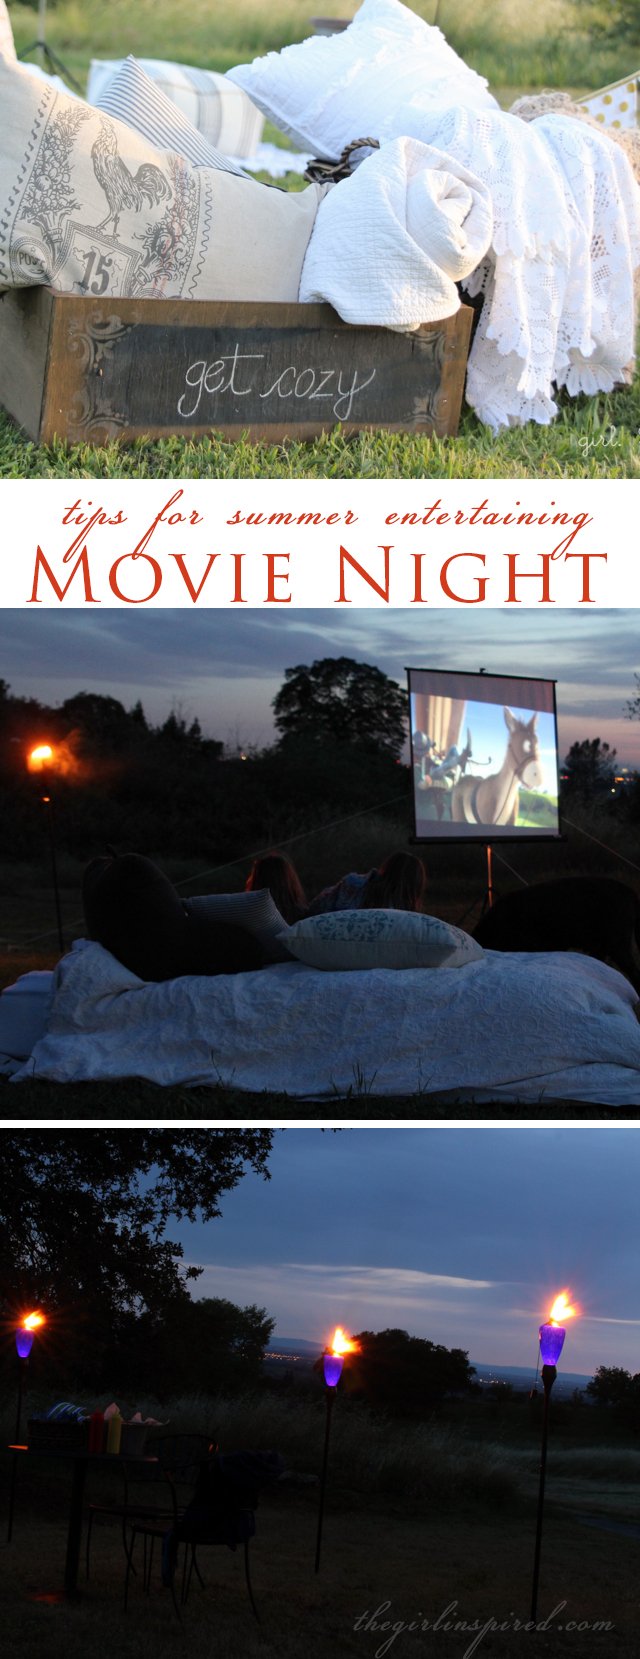 Outdoor Movie Night and seven secrets for summer entertaining